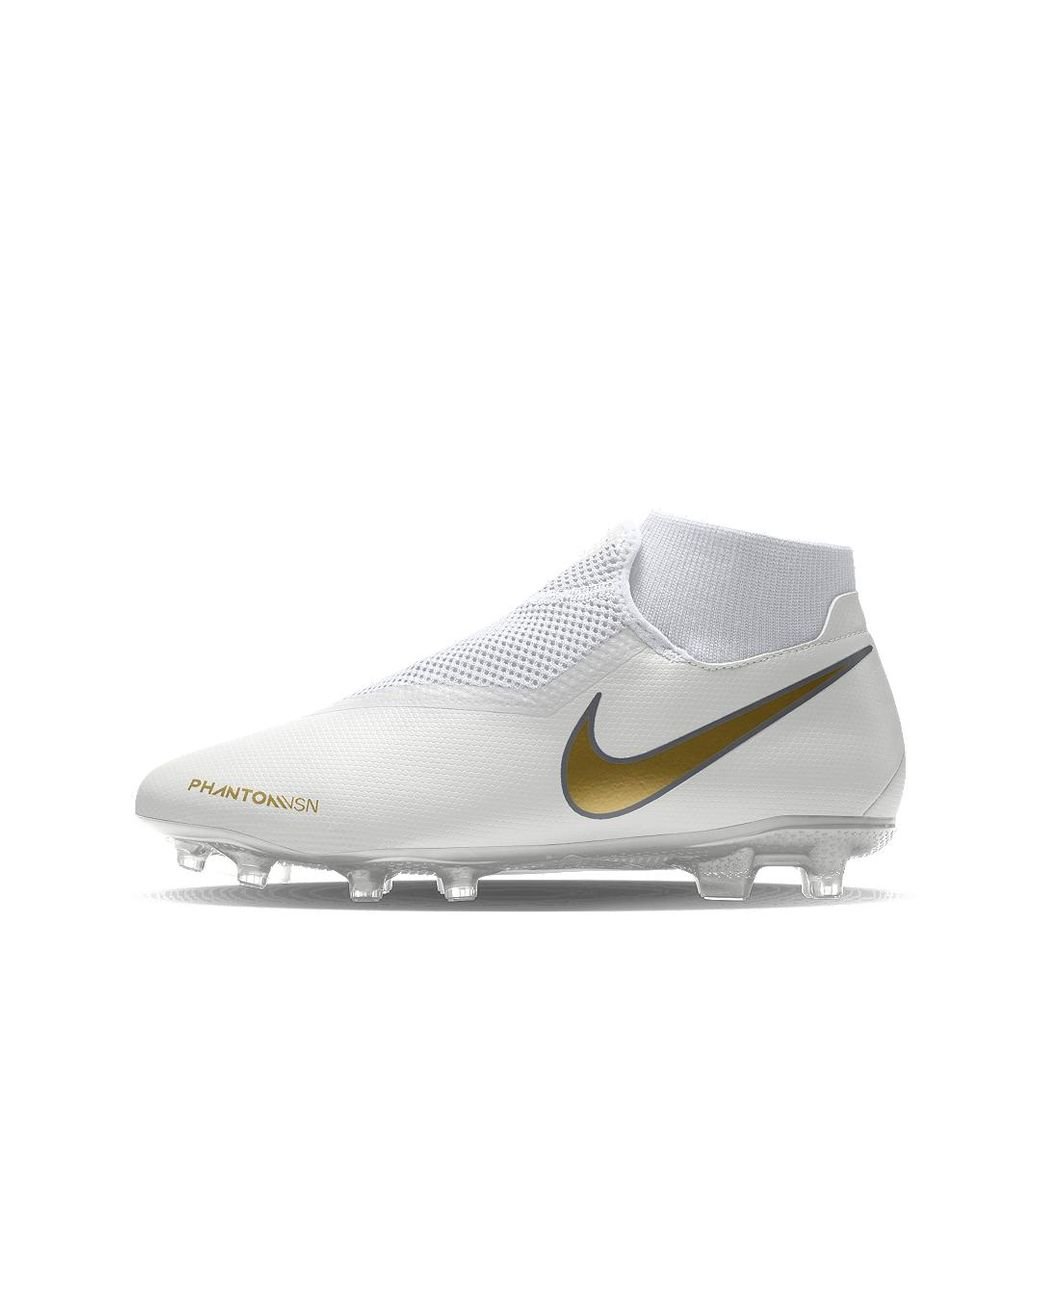 Nike Phantom Vision Academy Mg By You Custom Multi-ground Cleat in | Lyst